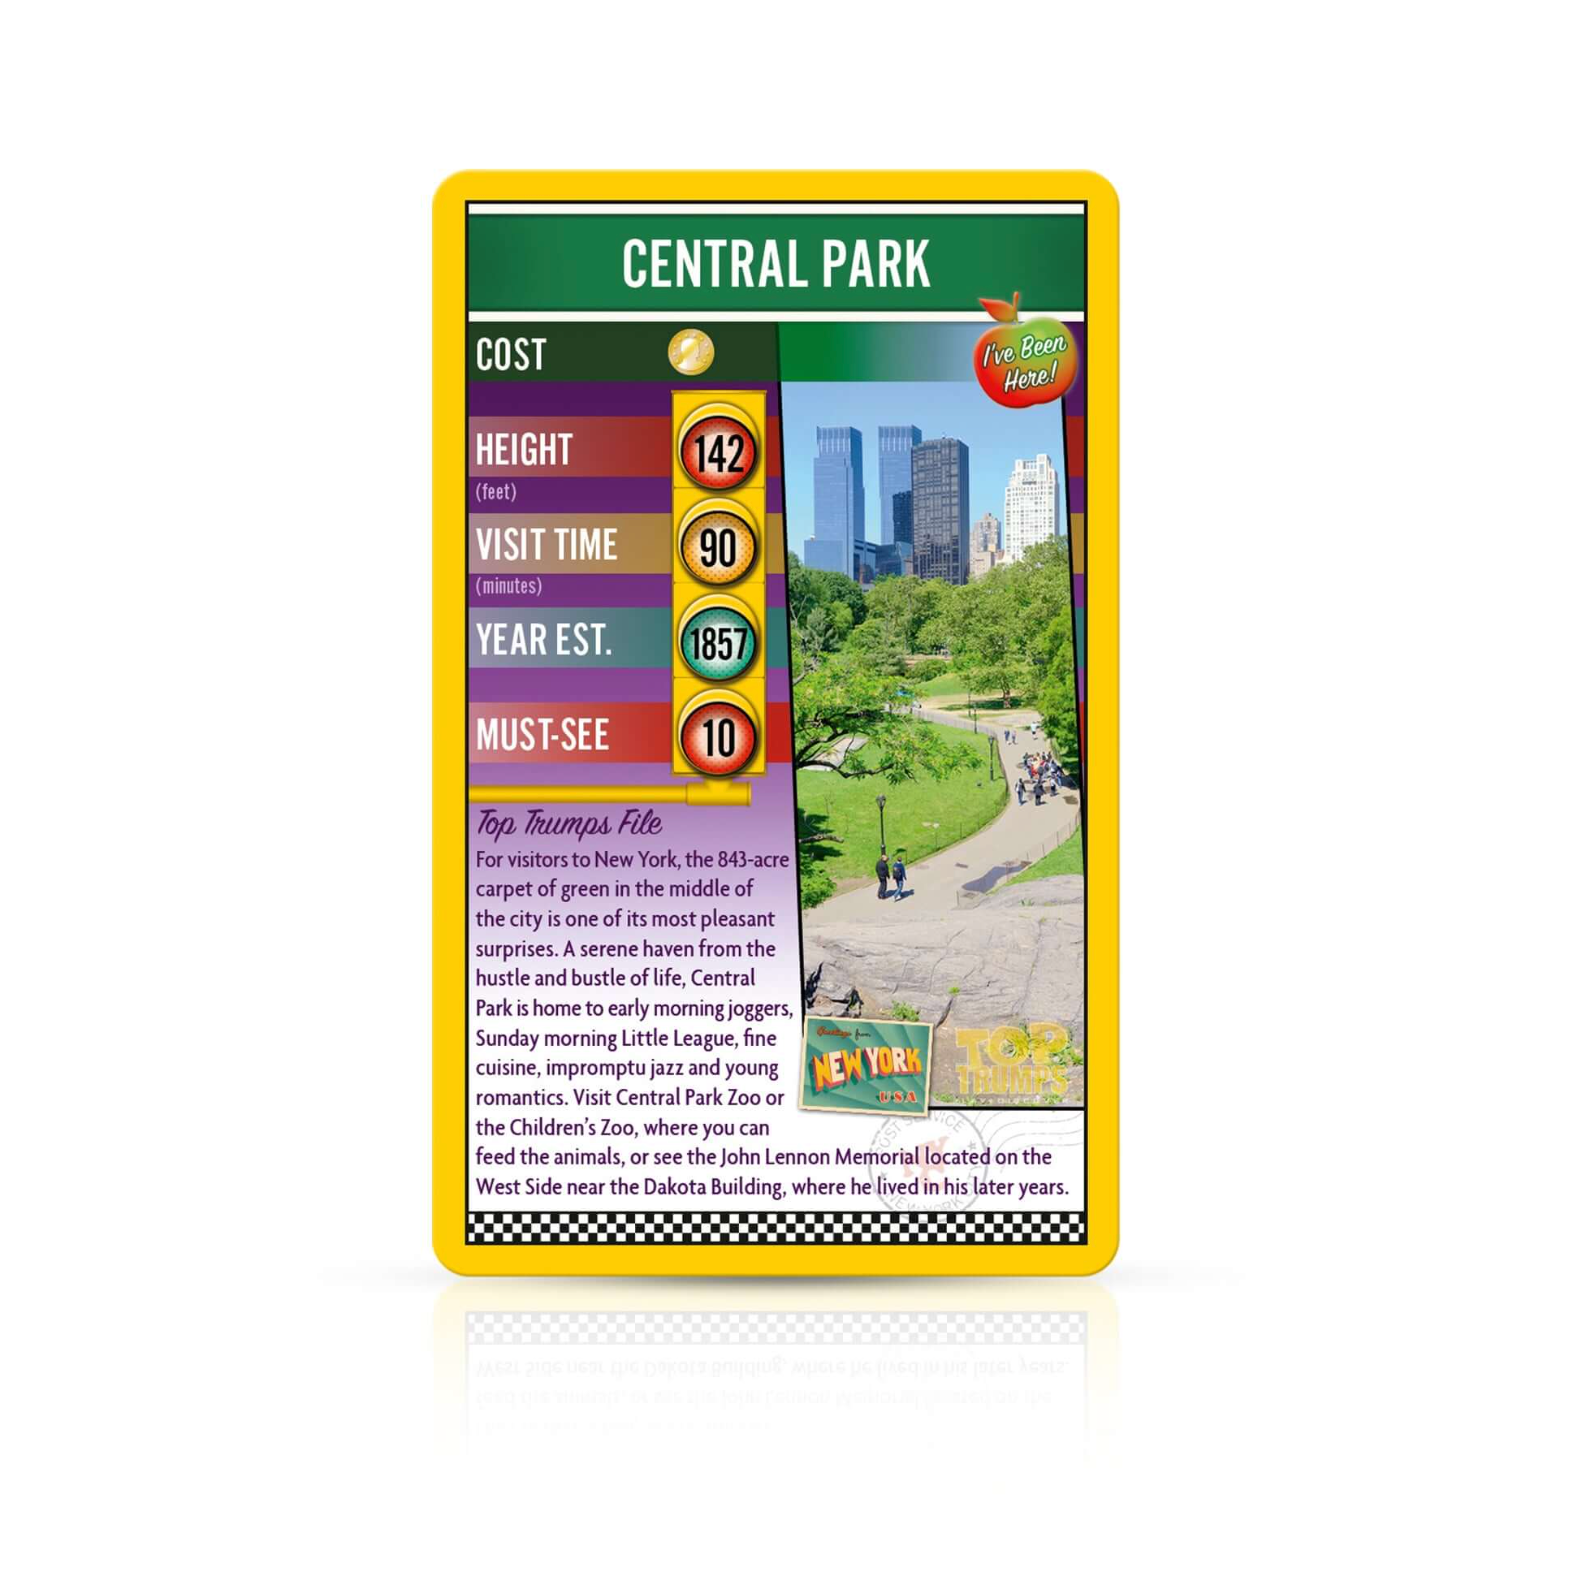 New York City Top Trumps Card Game